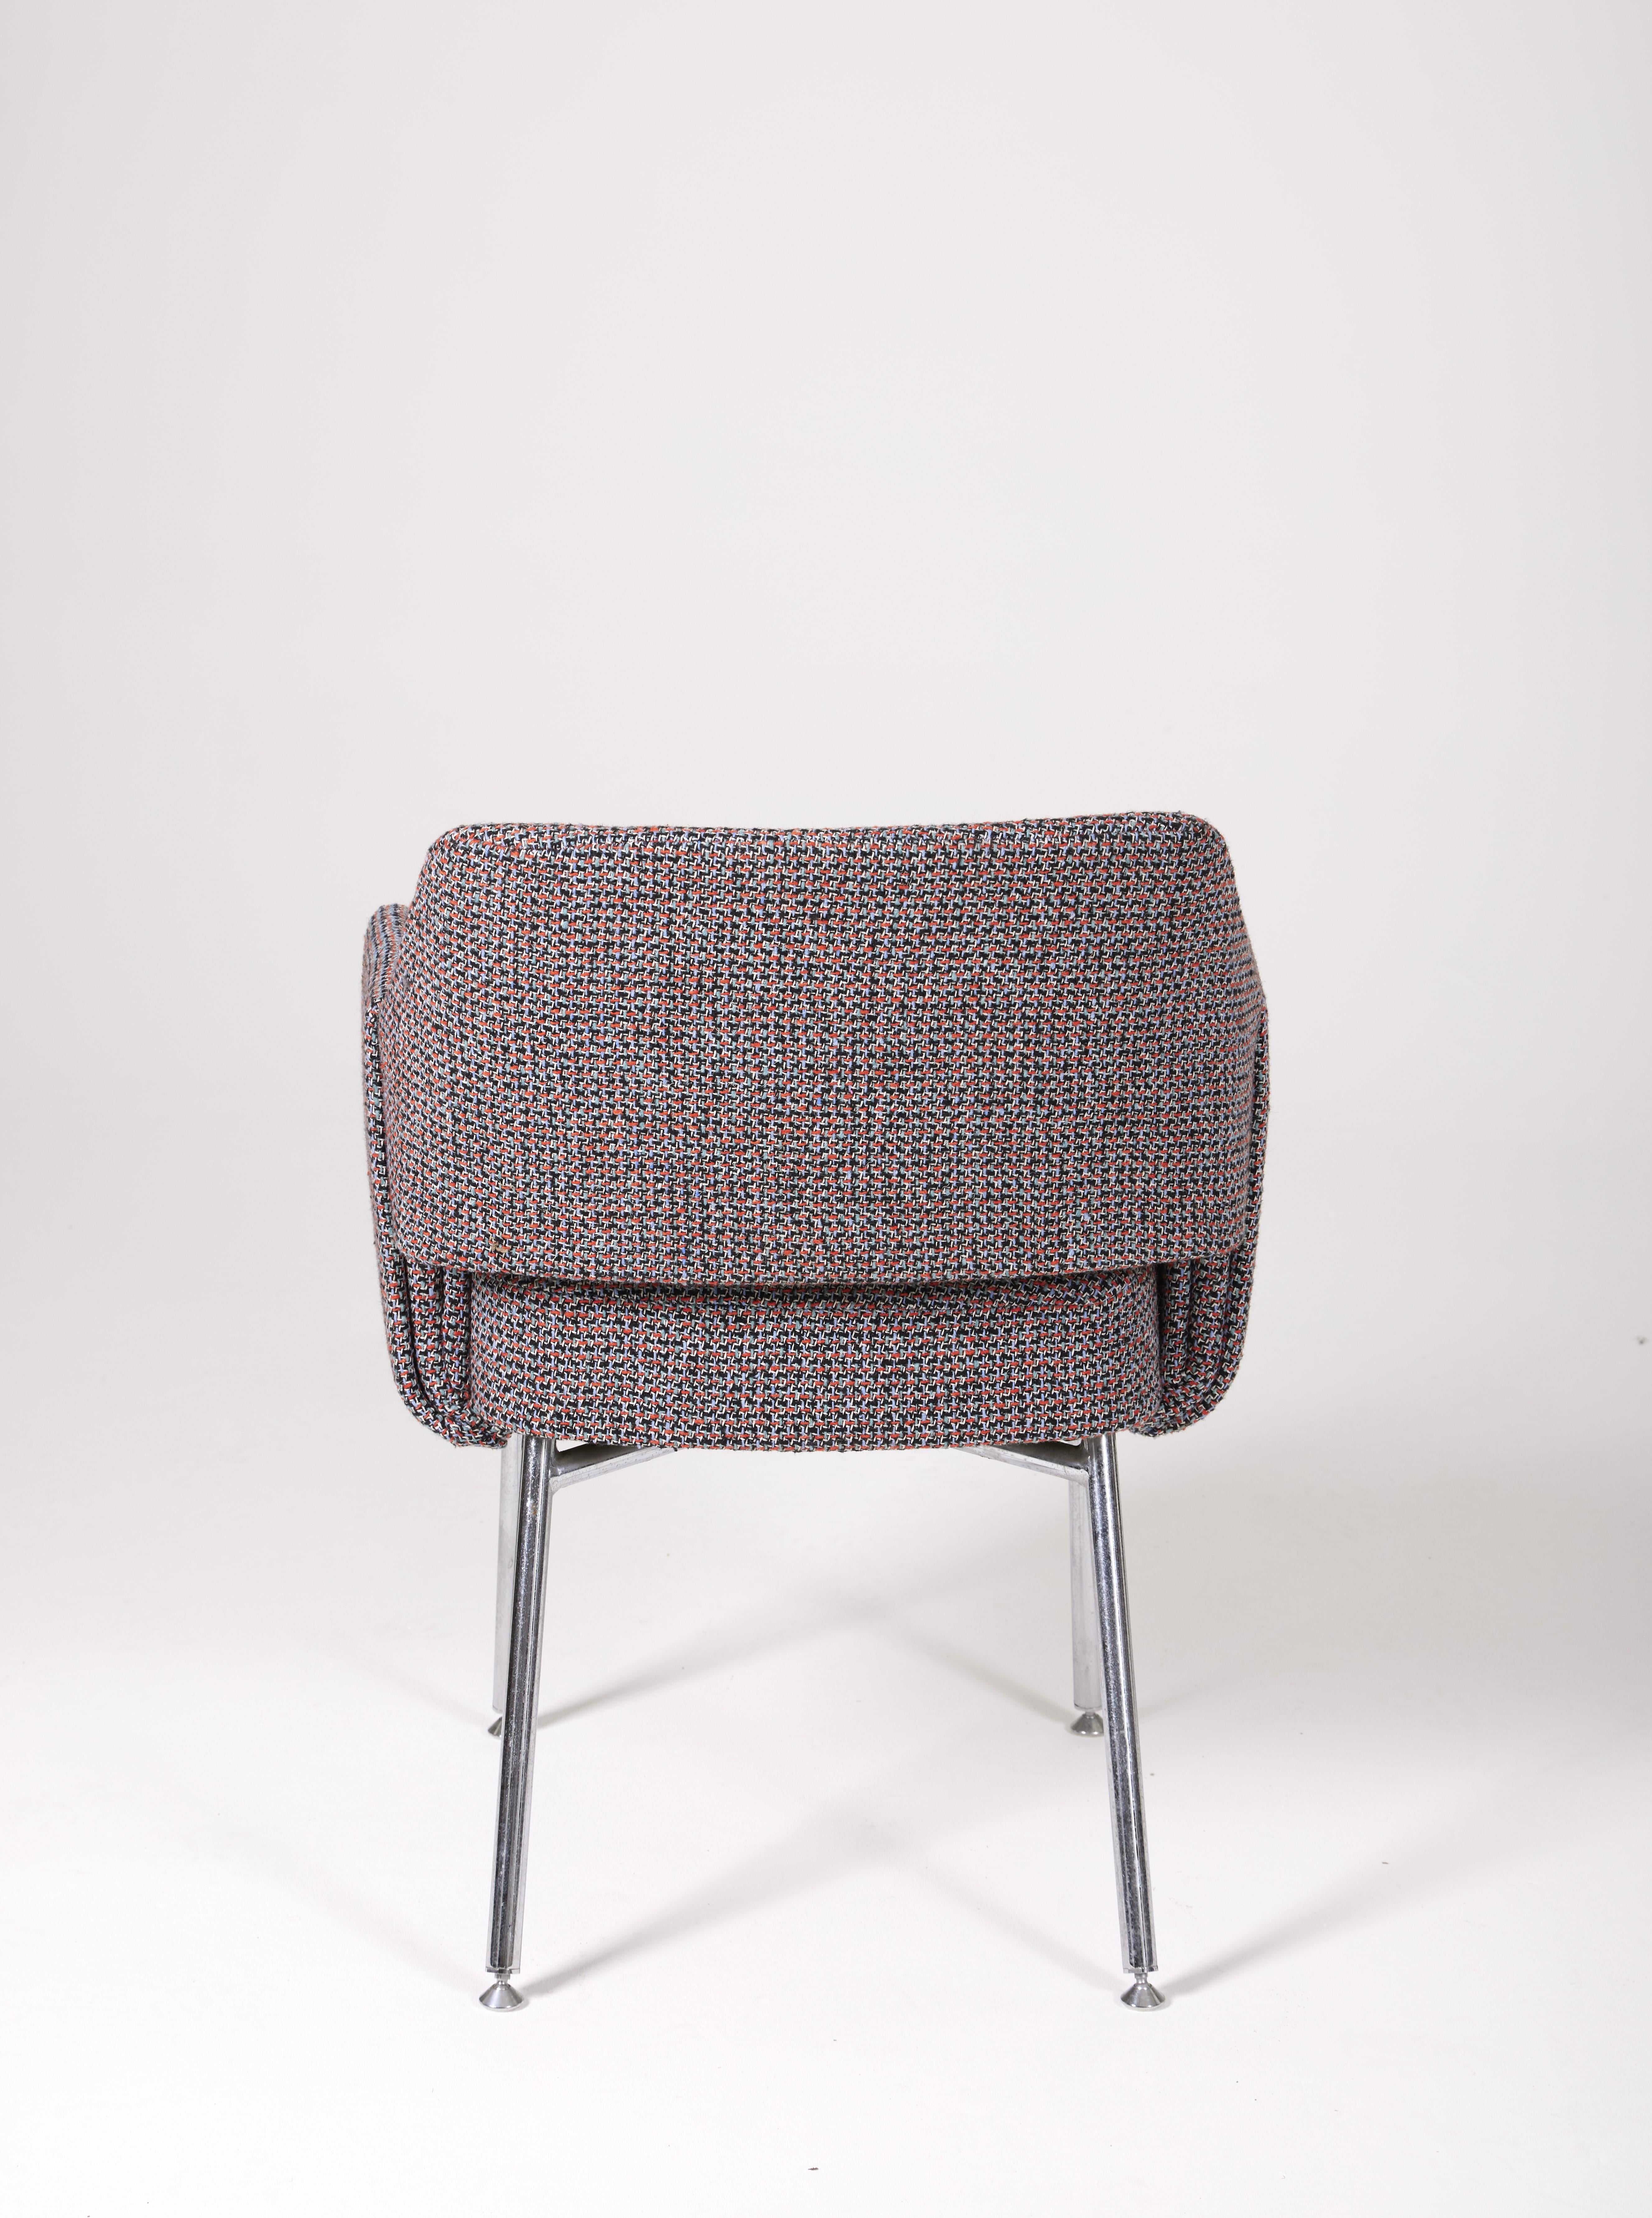 French Deauville Airborne armchair in tweed For Sale